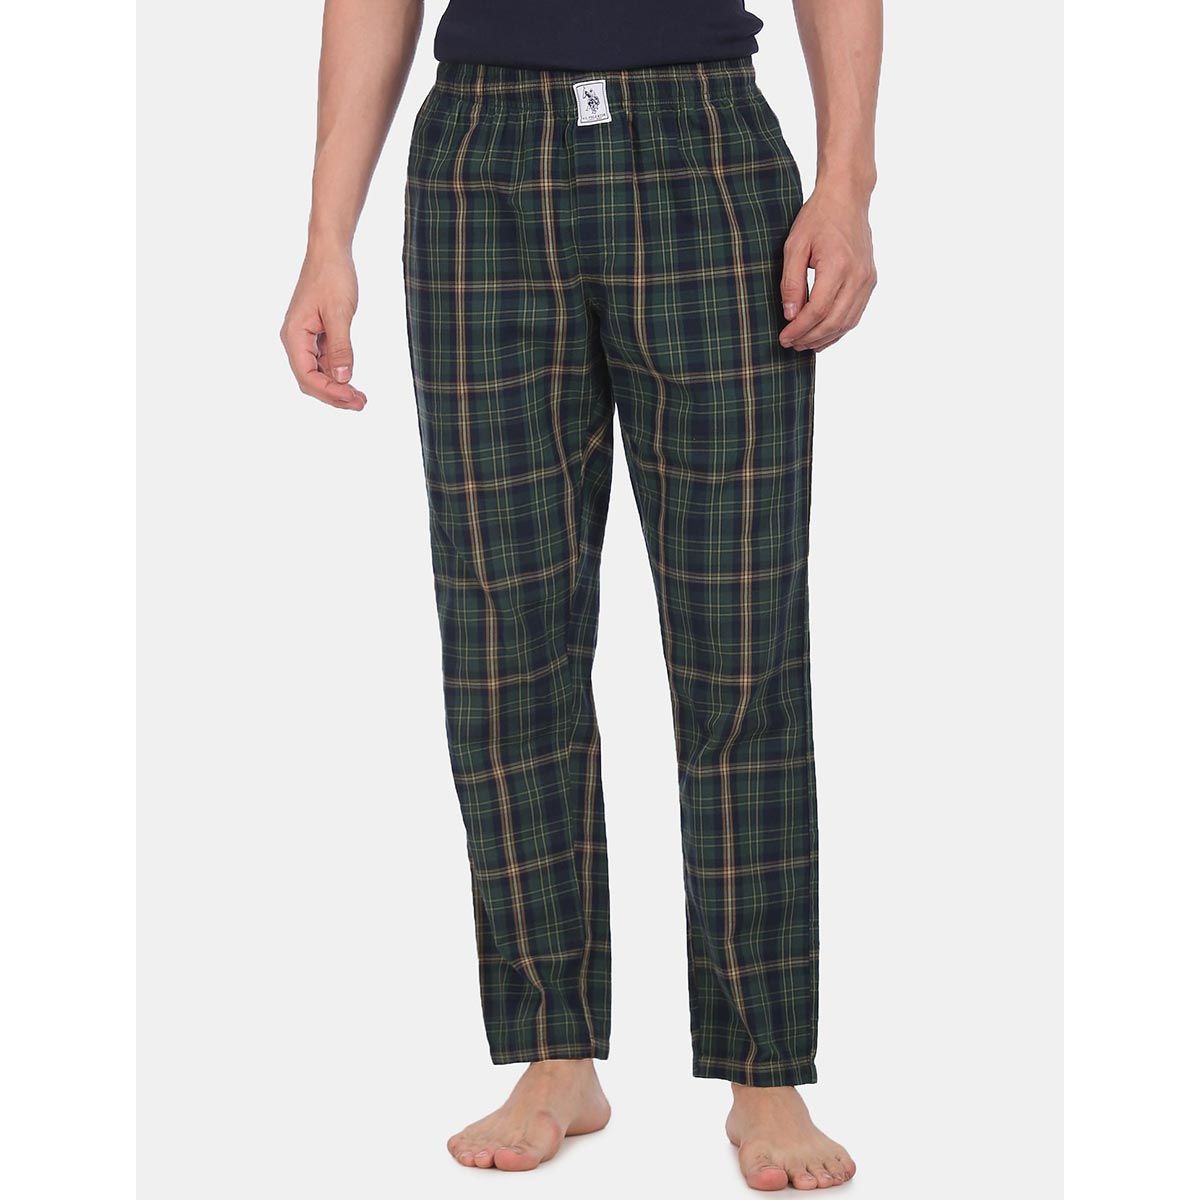 US POLO ASSN Men Green I659 Comfort Fit Checks Cotton Lounge Pants  Green Buy US POLO ASSN Men Green I659 Comfort Fit Checks Cotton Lounge  Pants Green Online at Best Price in